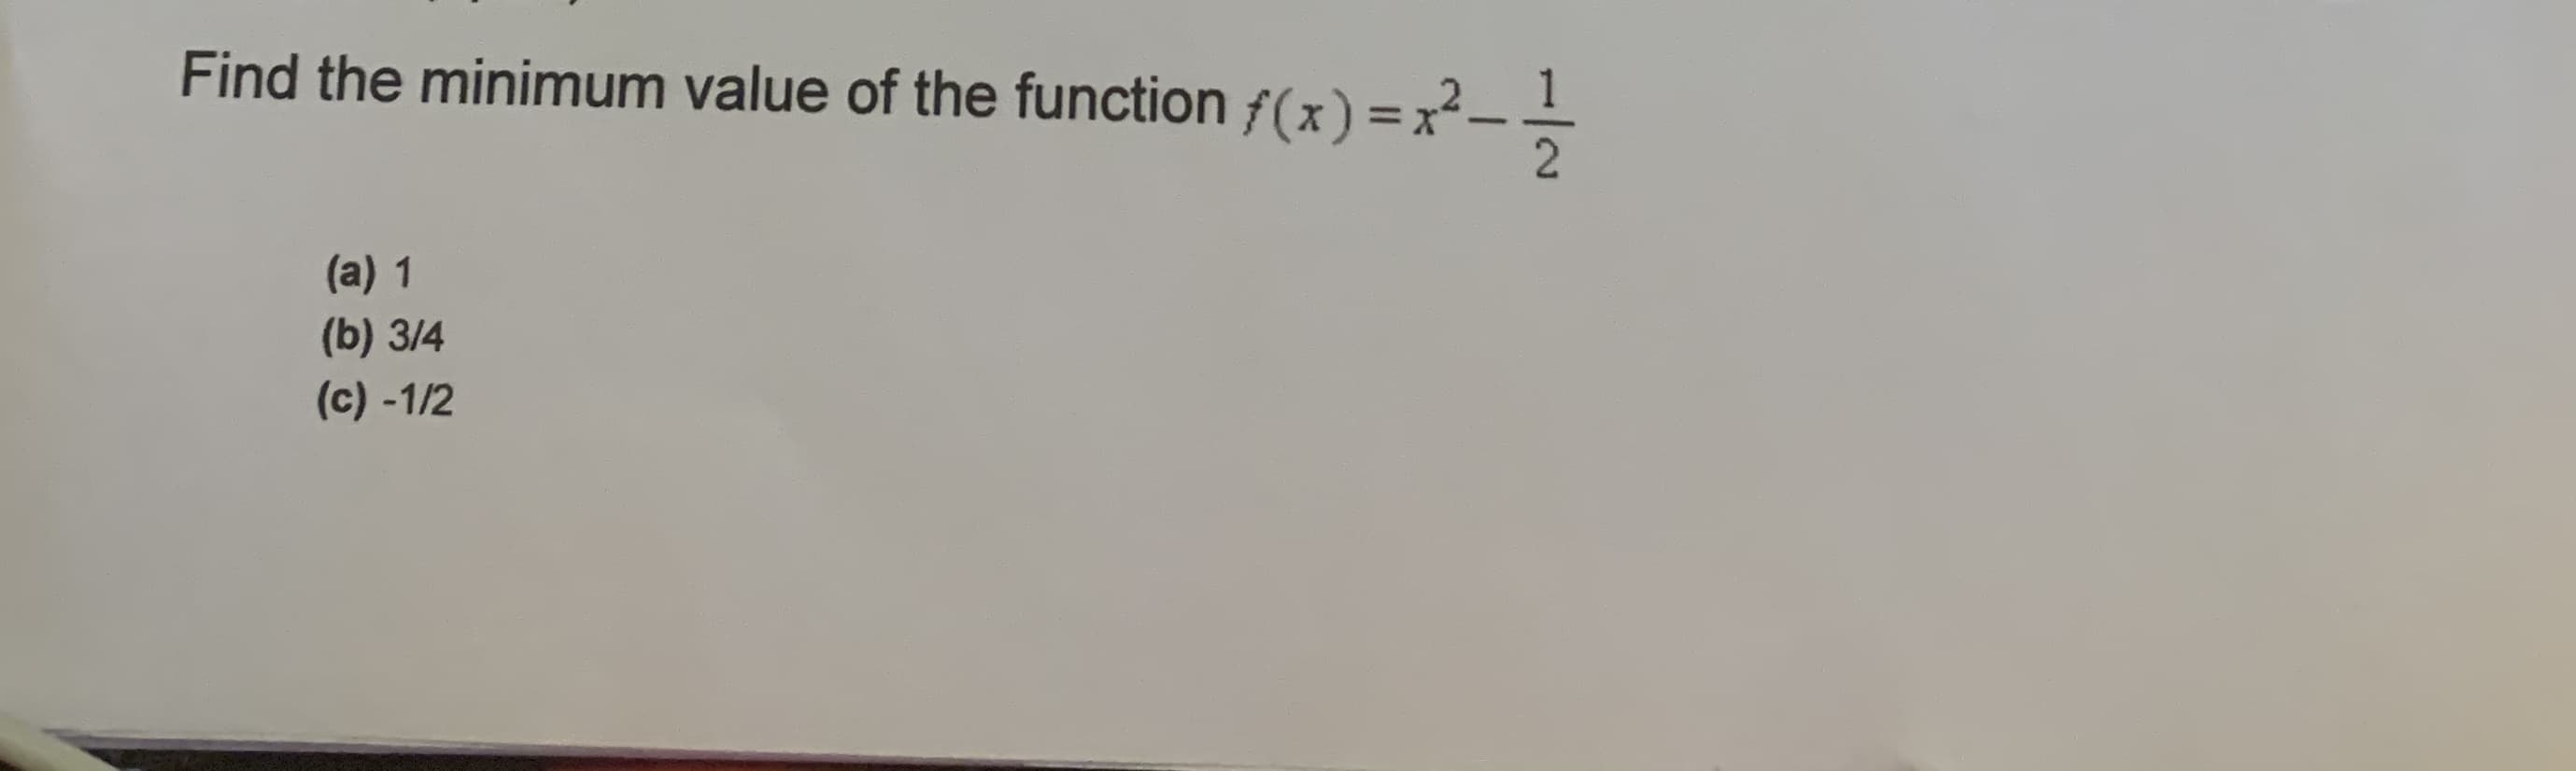 Find the minimum value of the function f(x) =x²-
(a) 1
(b) 3/4
(c) -1/2
